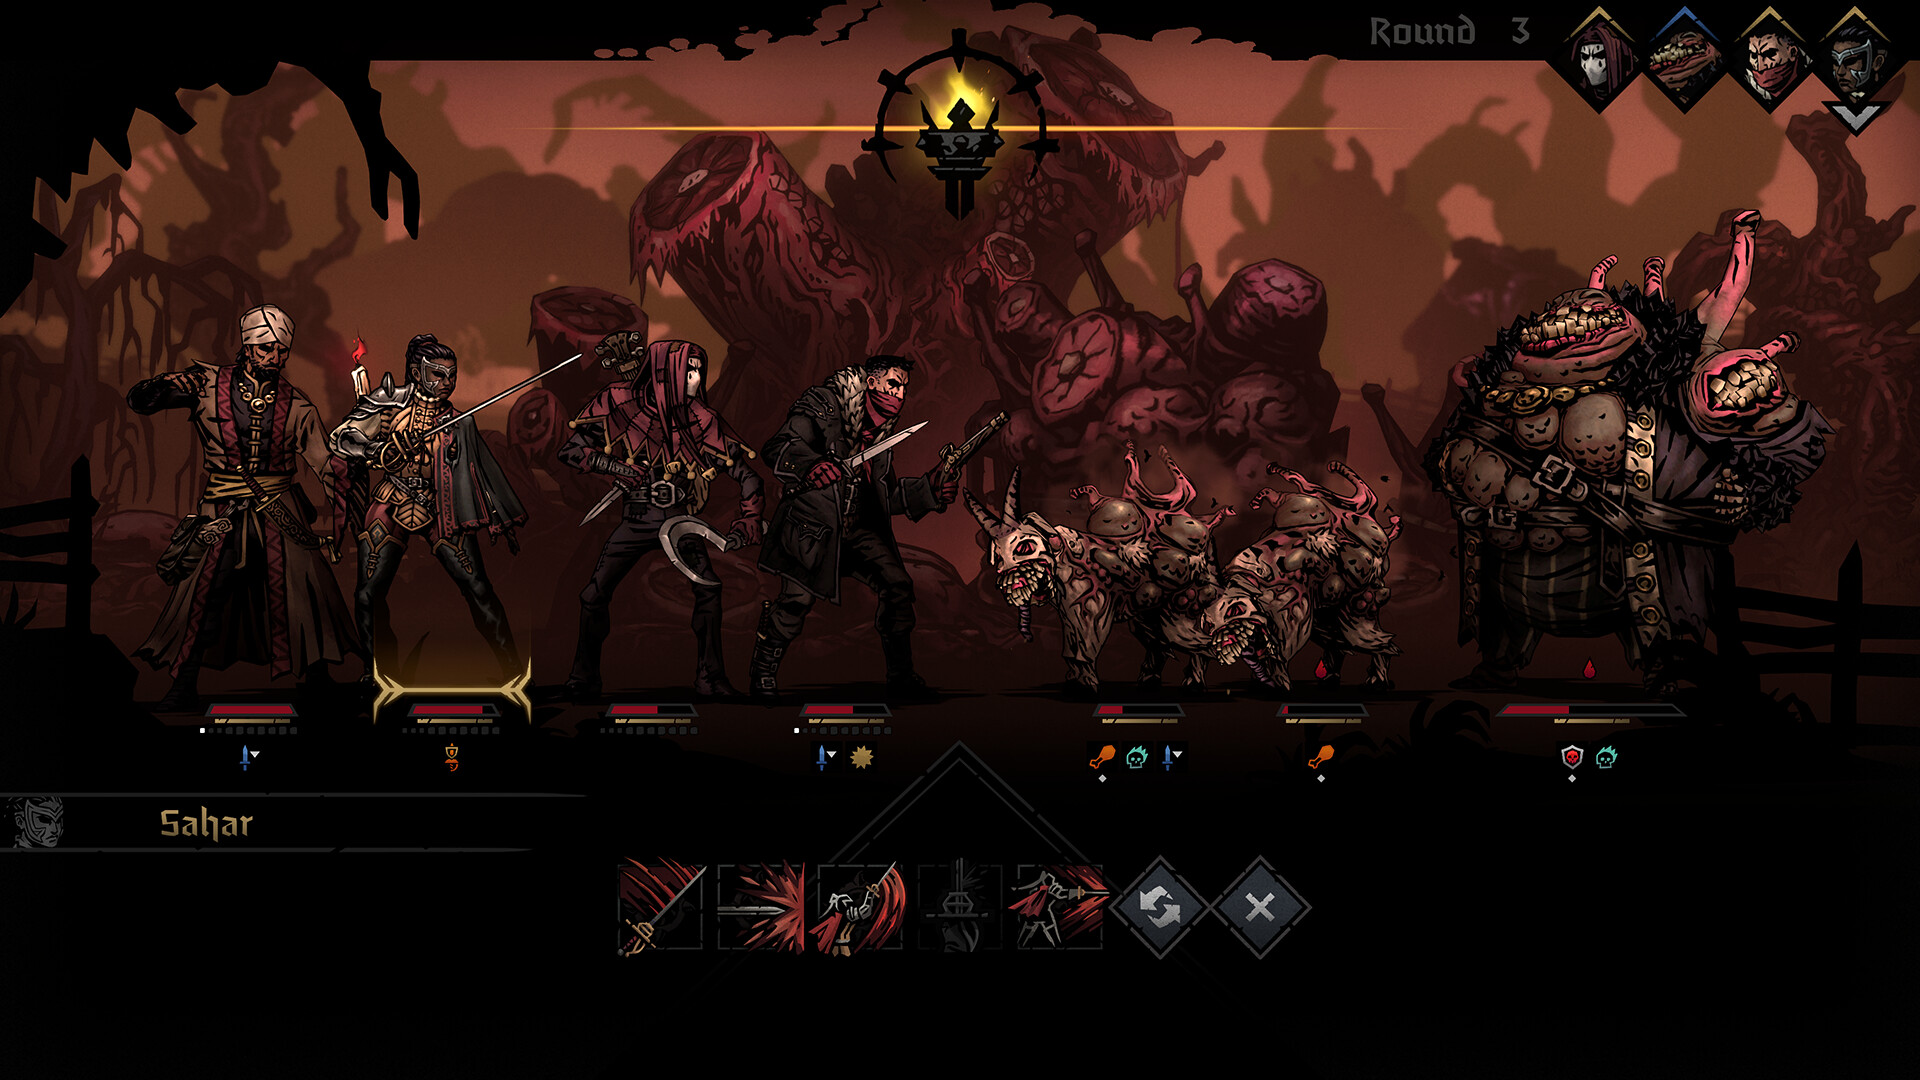 4-player co-op in a high fantasy pixelart world, Hammerwatch II is set to  round out the summer